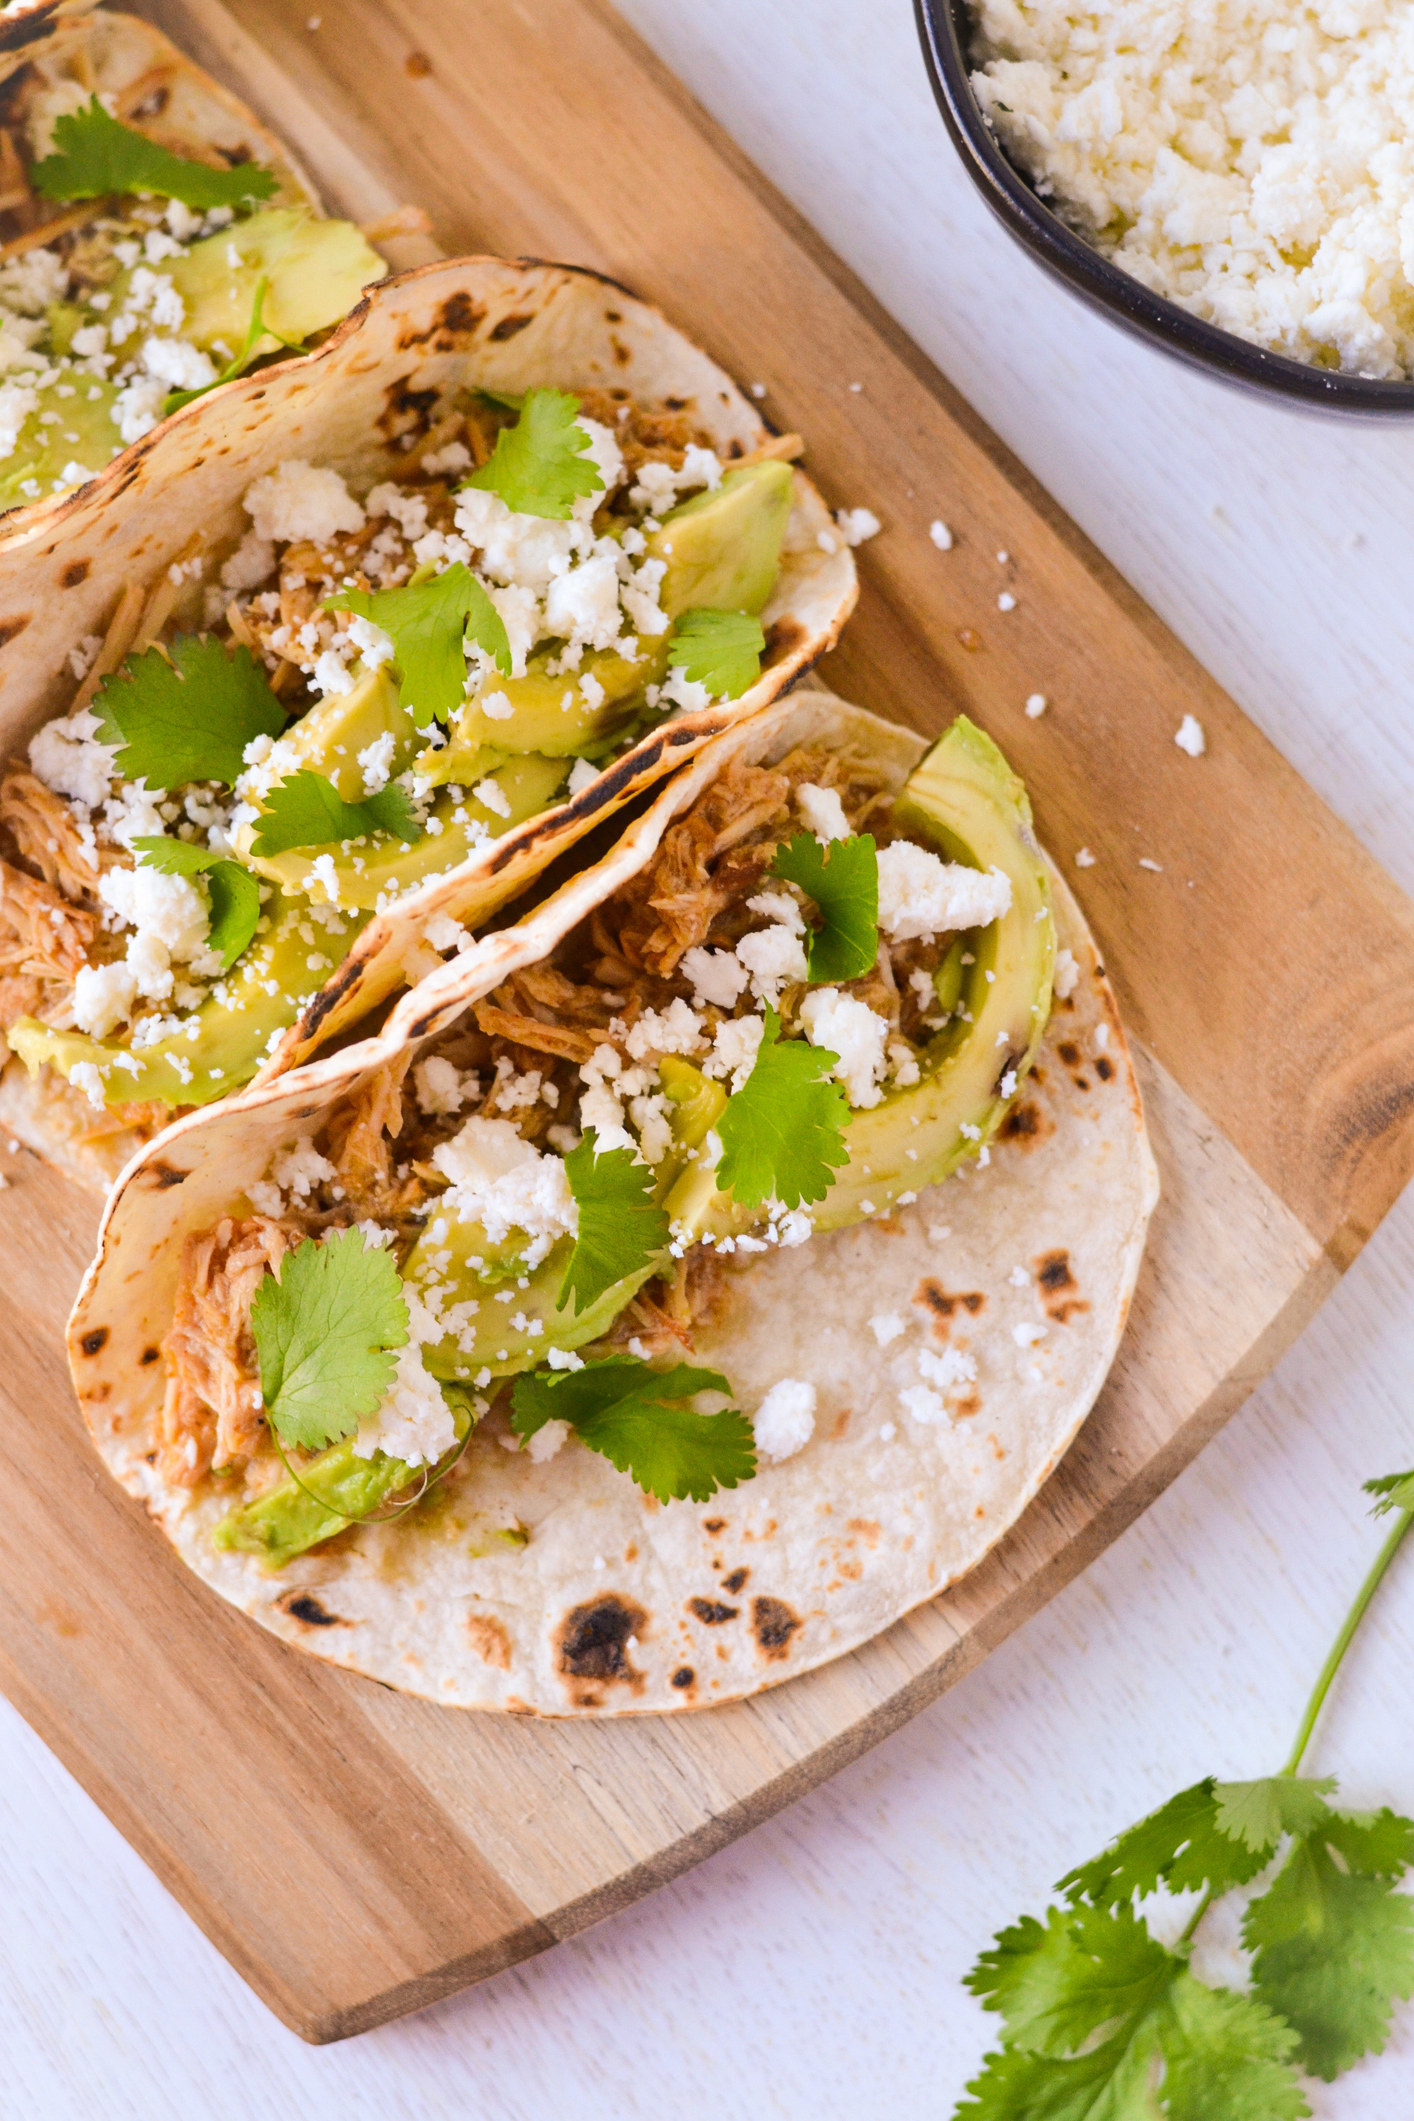 Three tortillas filled with shredded chicken, avocado, cheese, and cilantro.